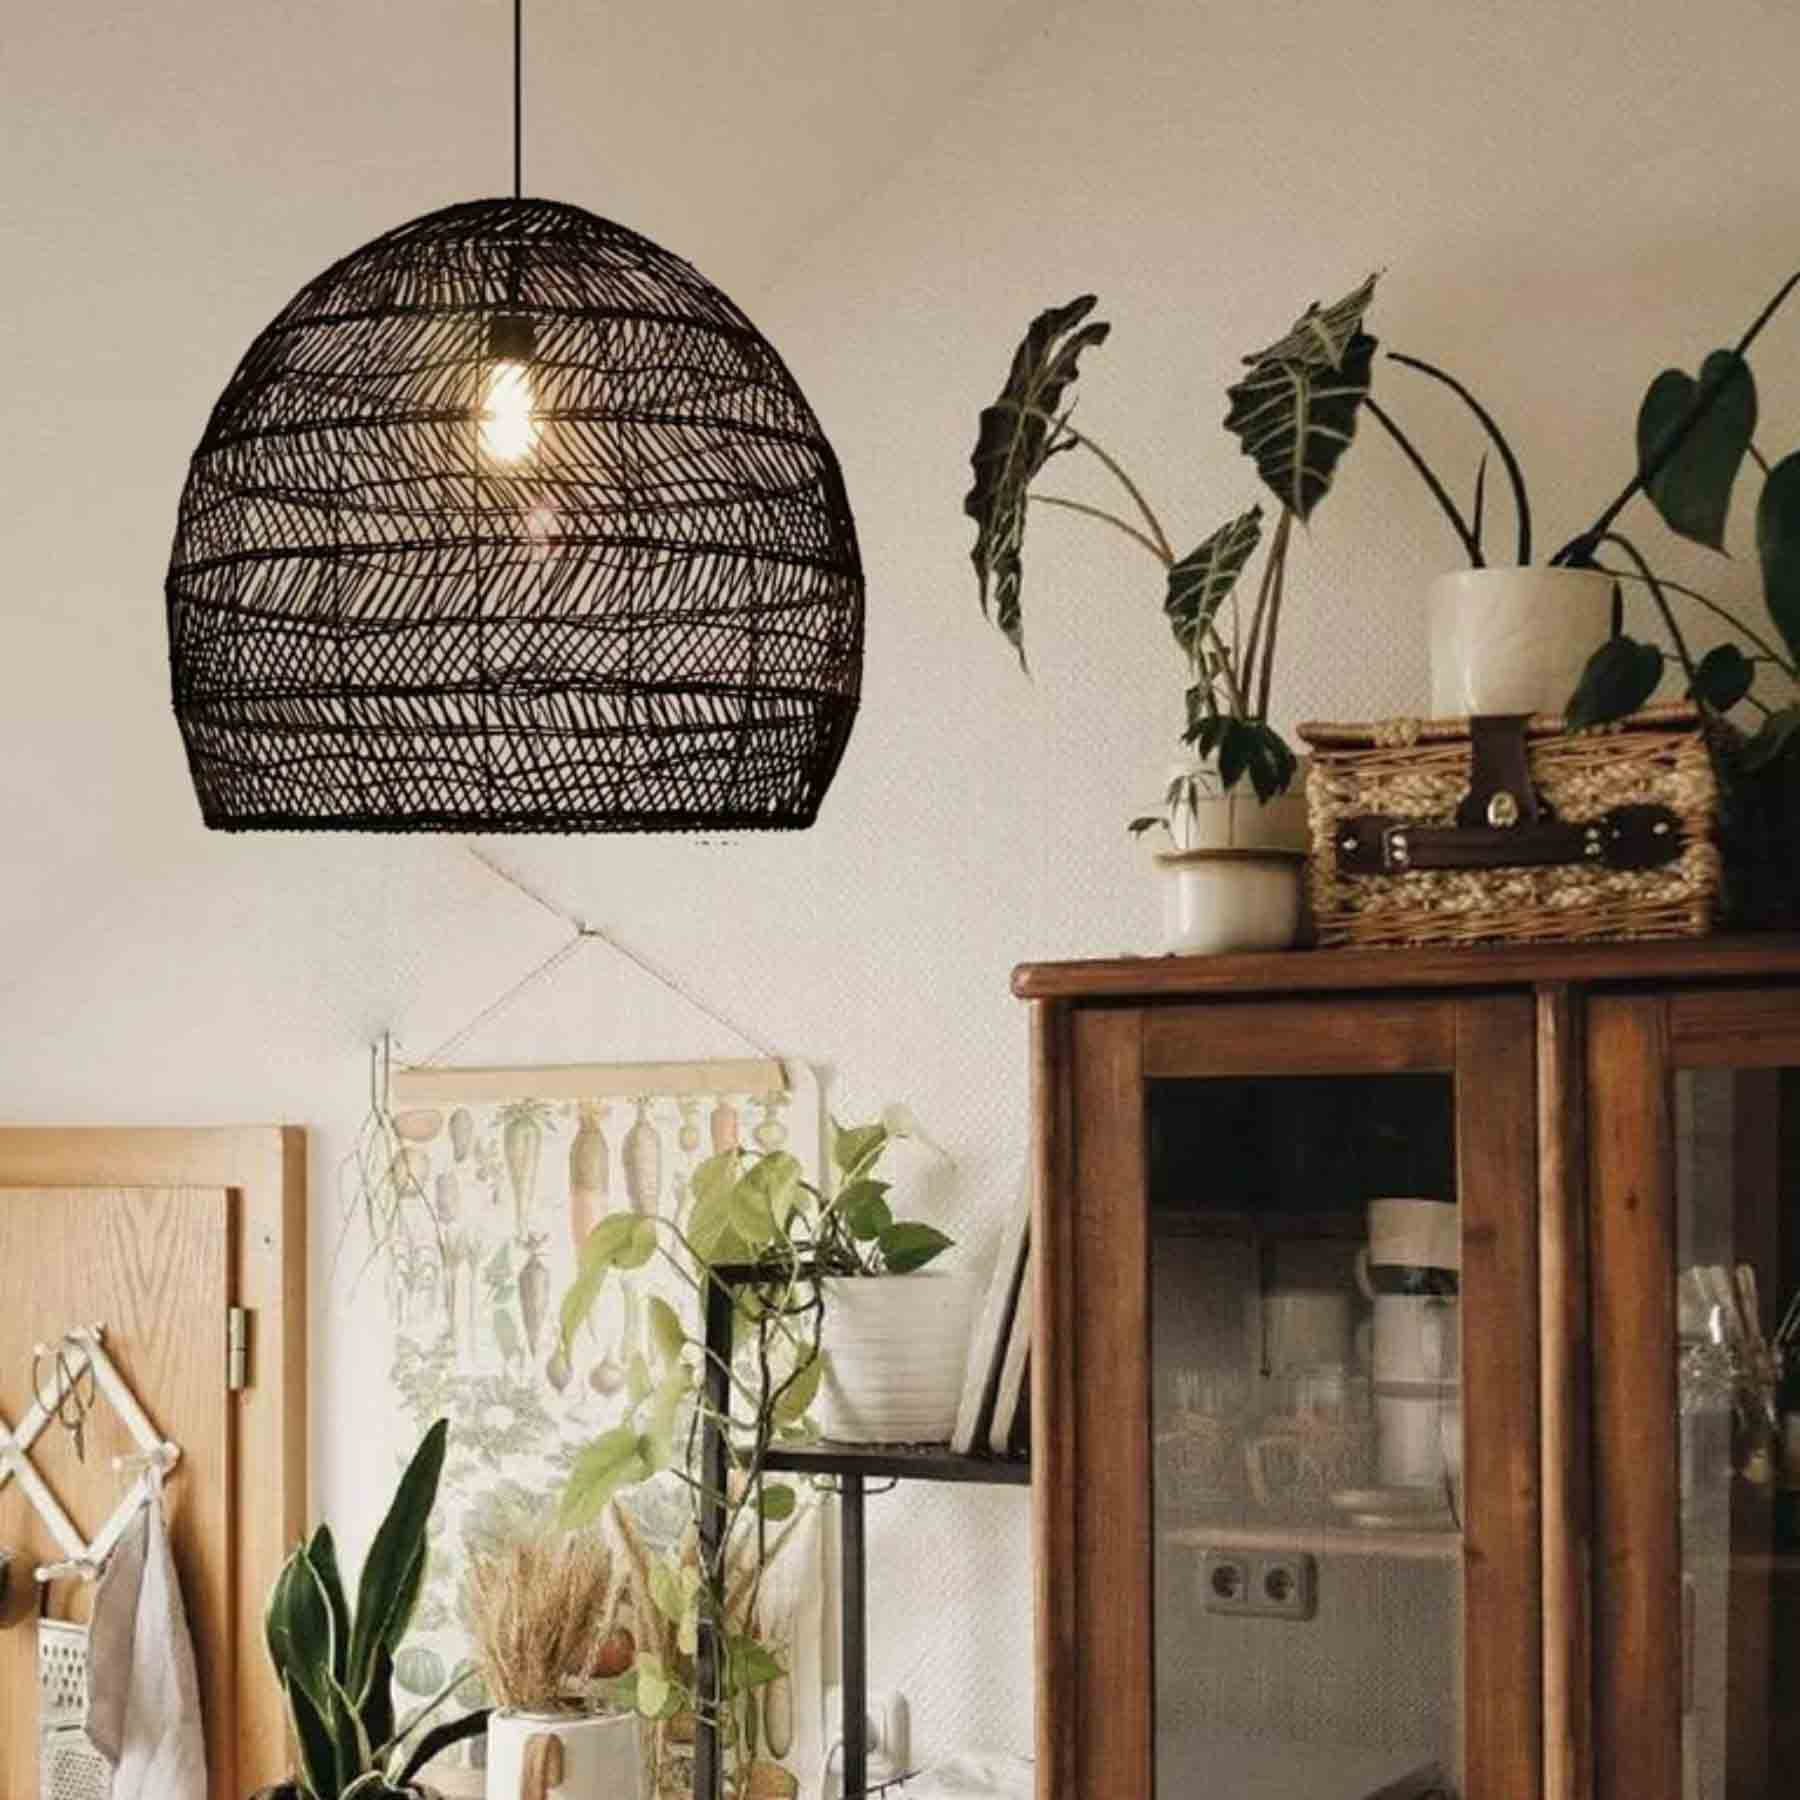 the rattan pendant light plays a crucial role as an artistic statement in the room